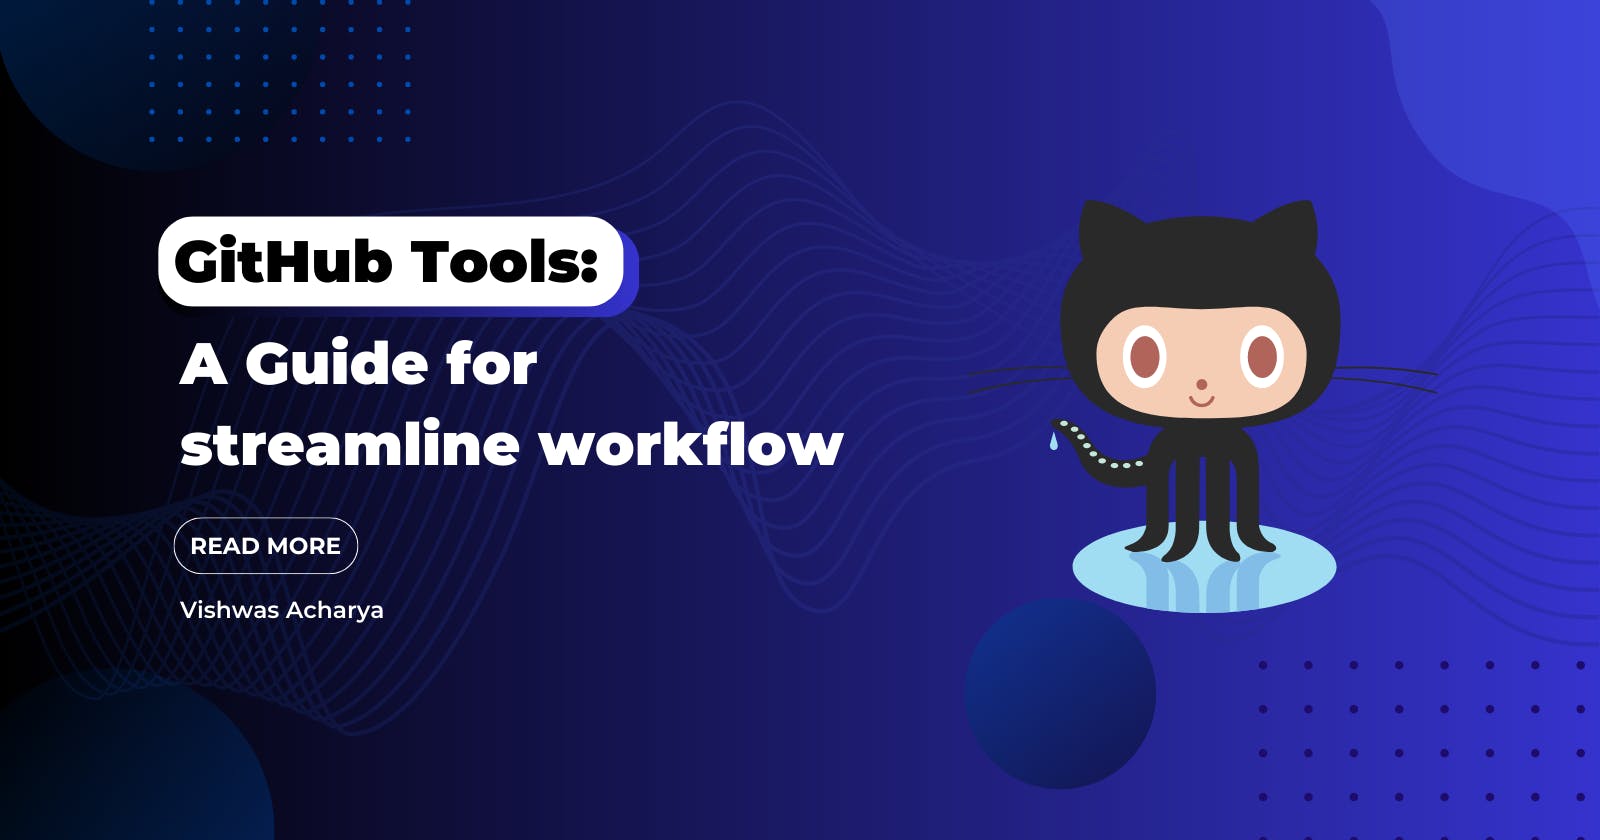 The Ultimate Guide to GitHub Tools for Streamlining Your Workflow